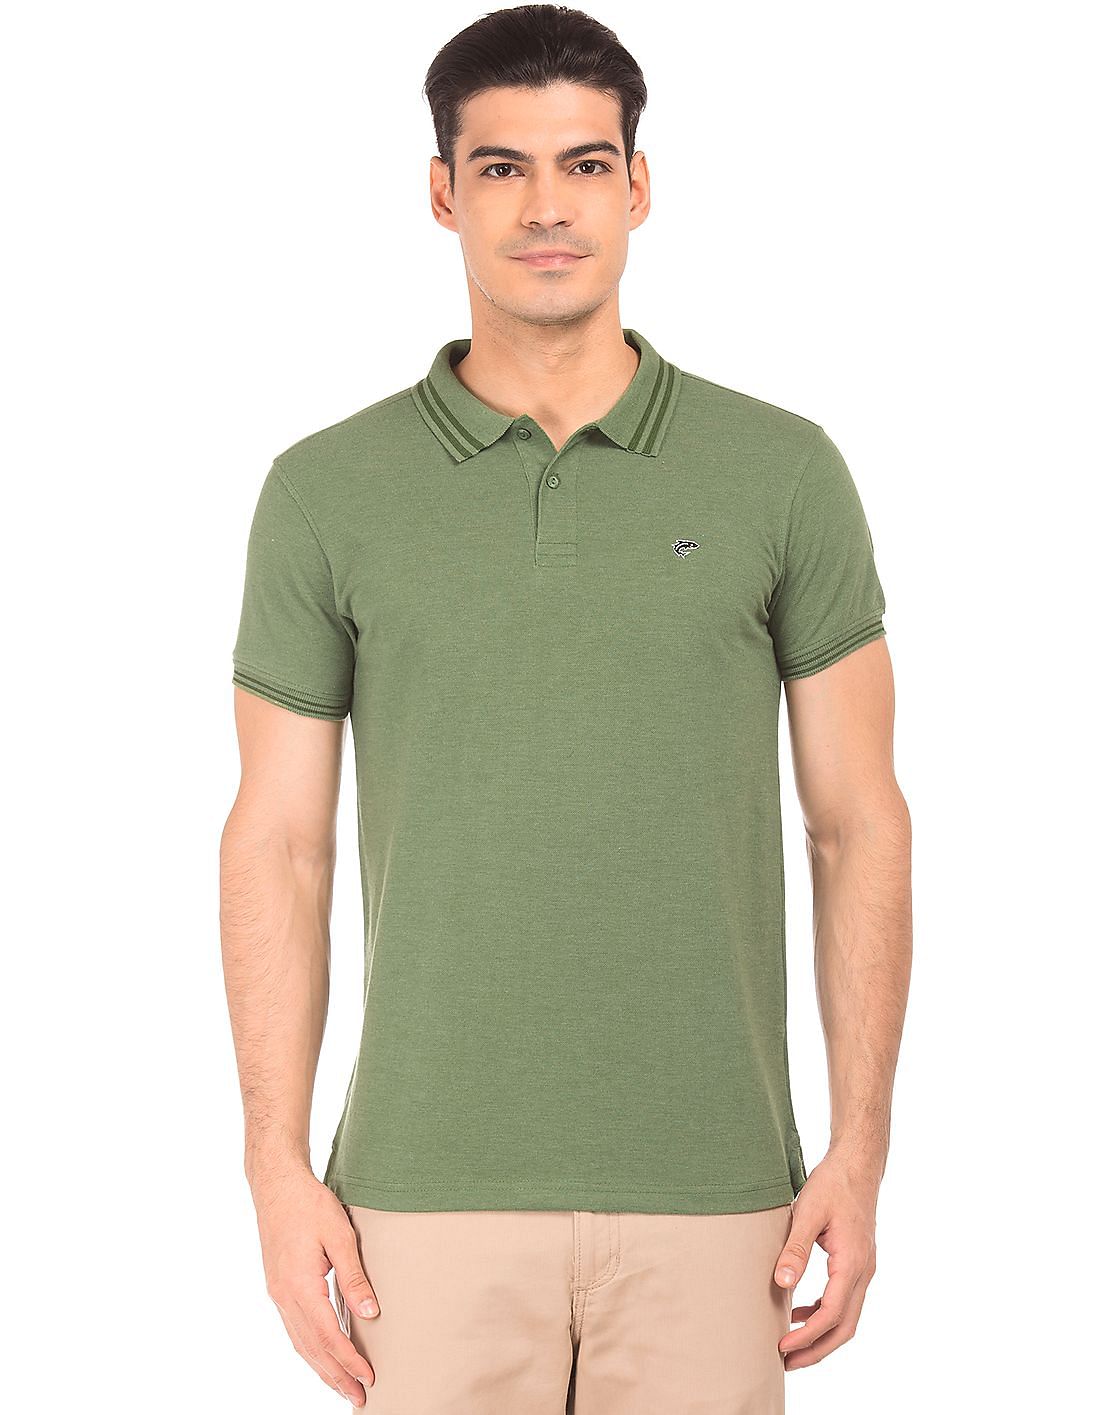 Buy Ruggers Tipped Regular Fit Polo Shirt - NNNOW.com